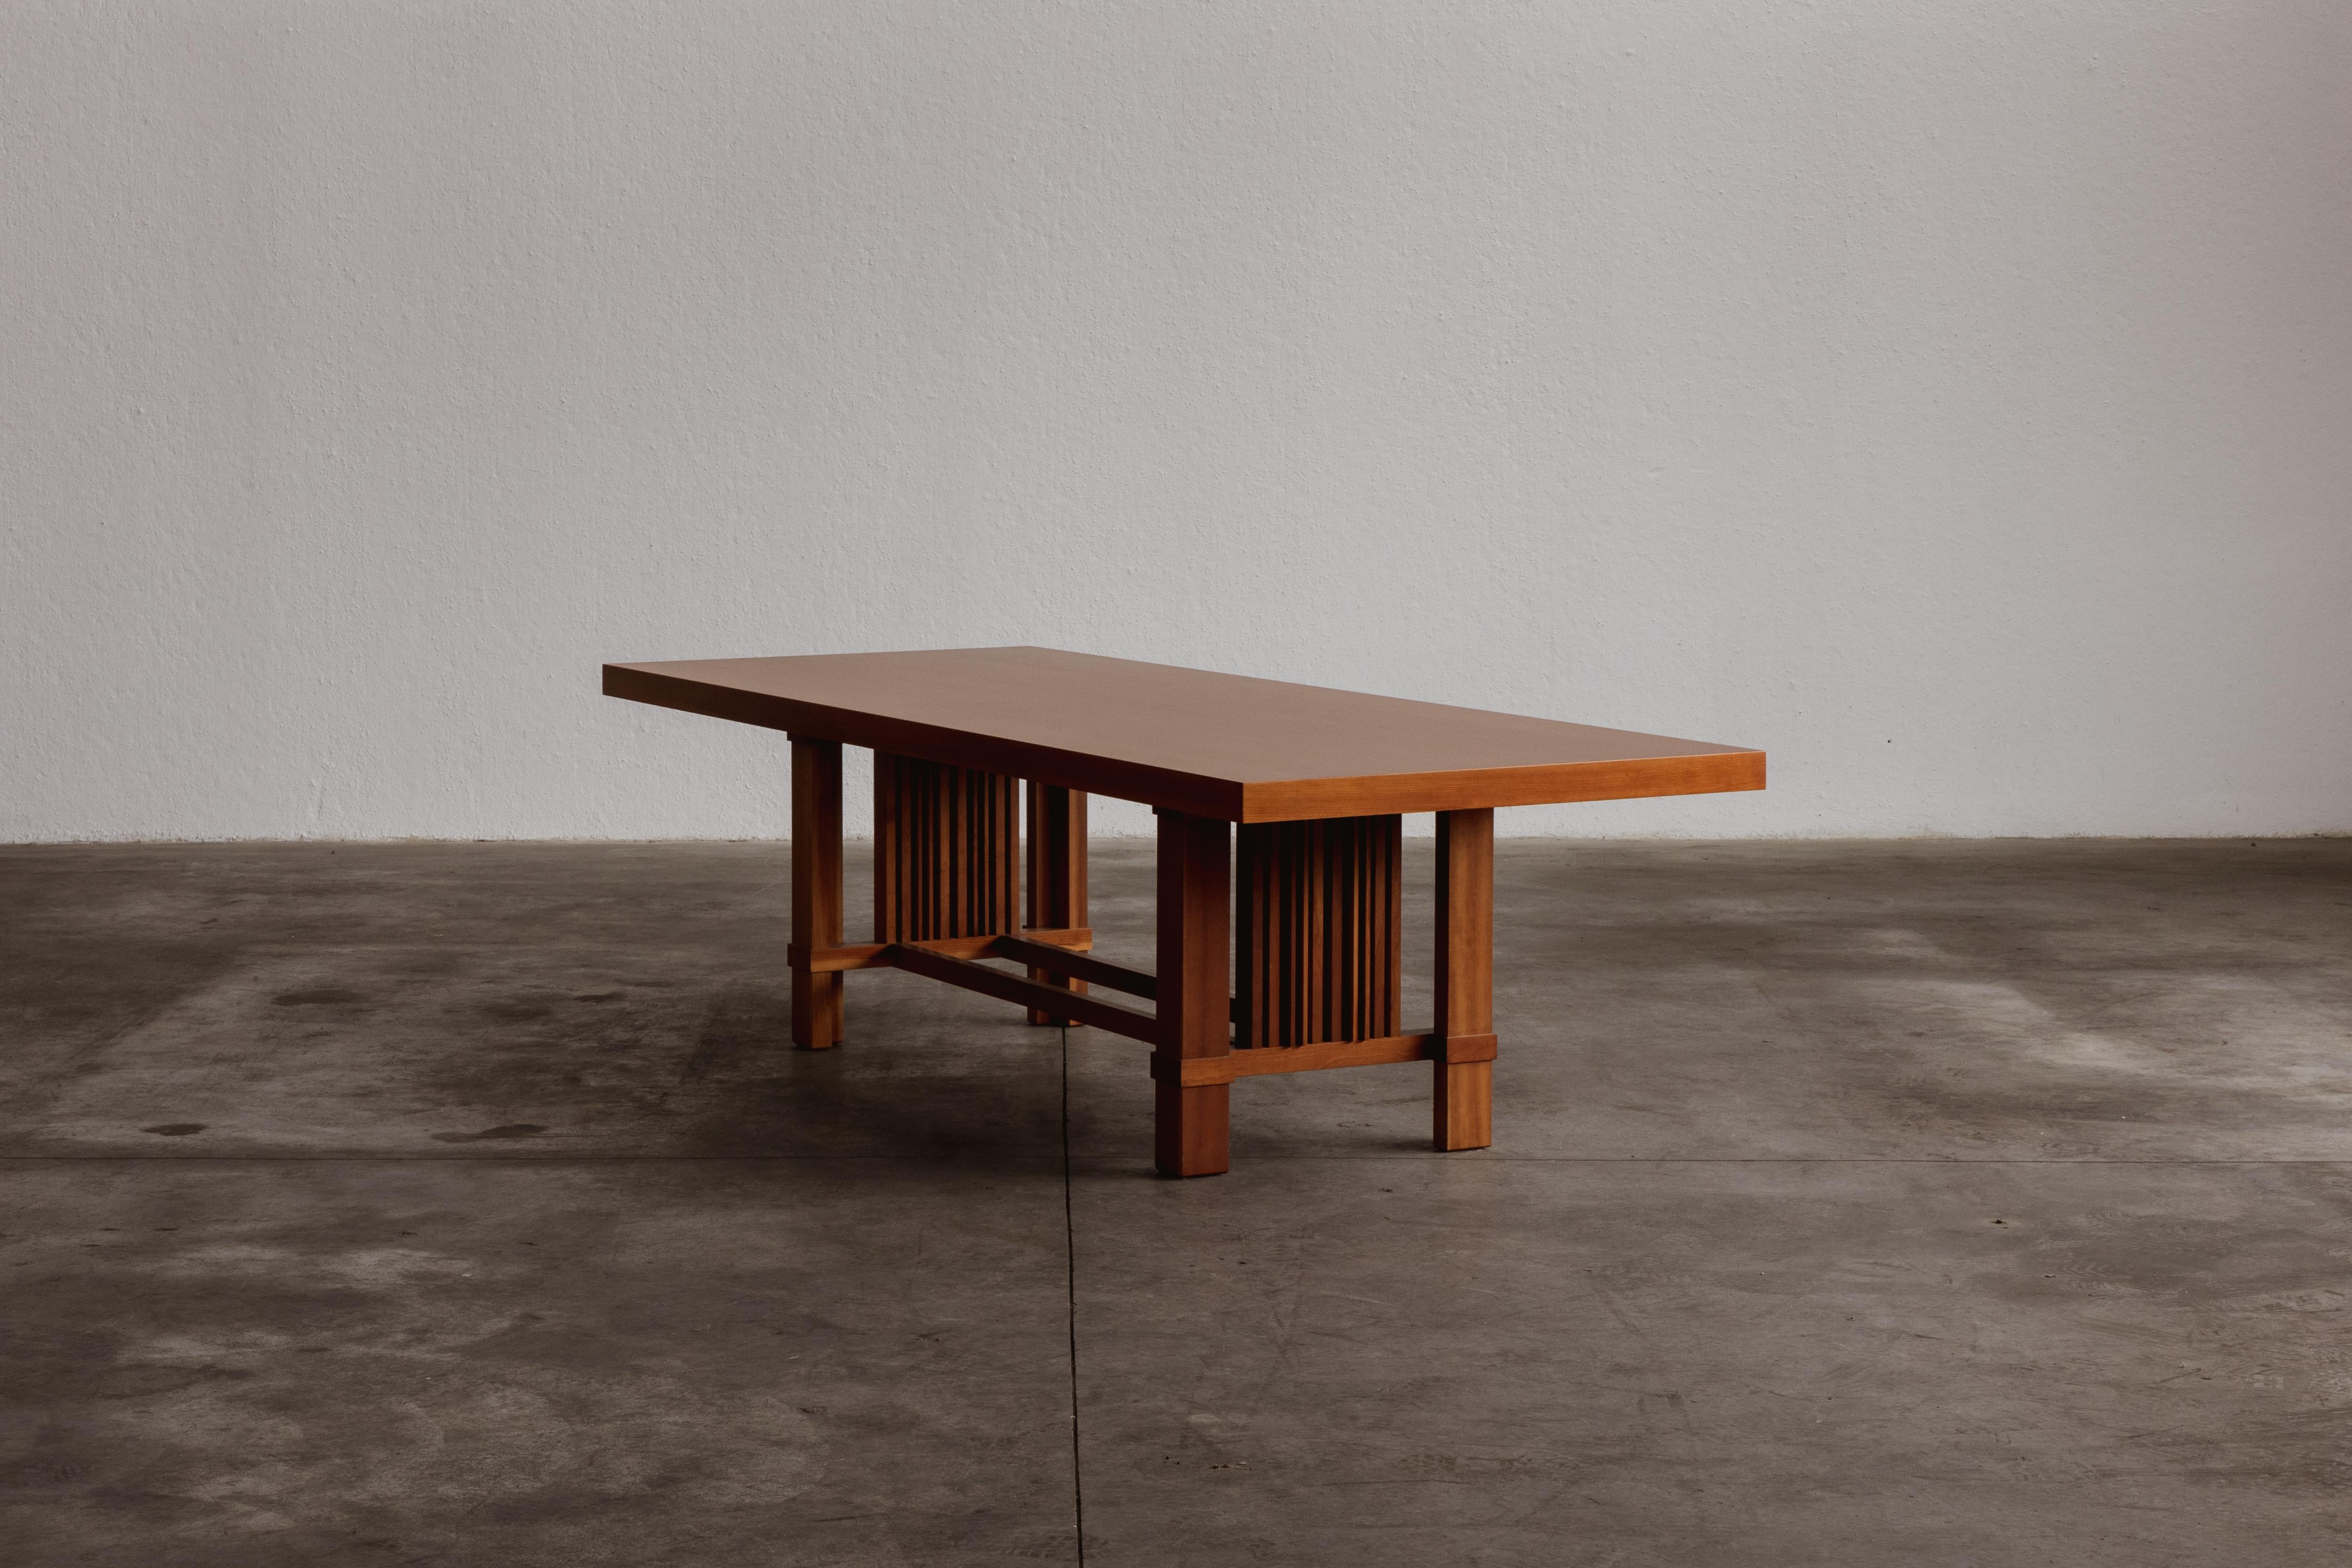 Frank Lloyd Wright “608 Taliesin” Dining Table for Cassina, 1986 In Good Condition For Sale In Lonigo, Veneto